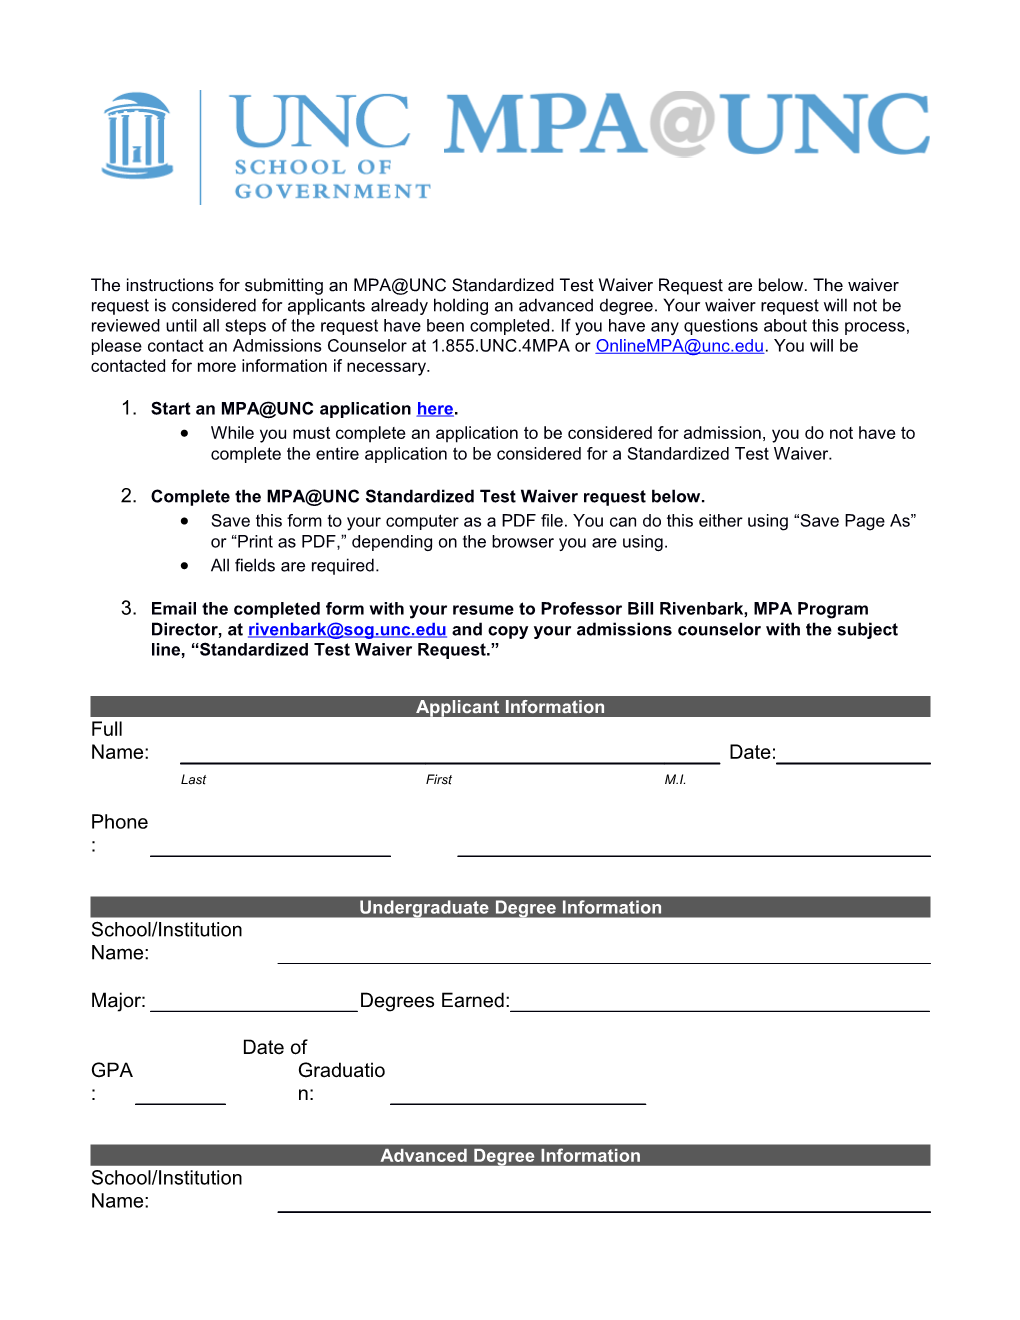 The Instructions for Submitting an MPA UNC Standardized Test Waiver Request Are Below